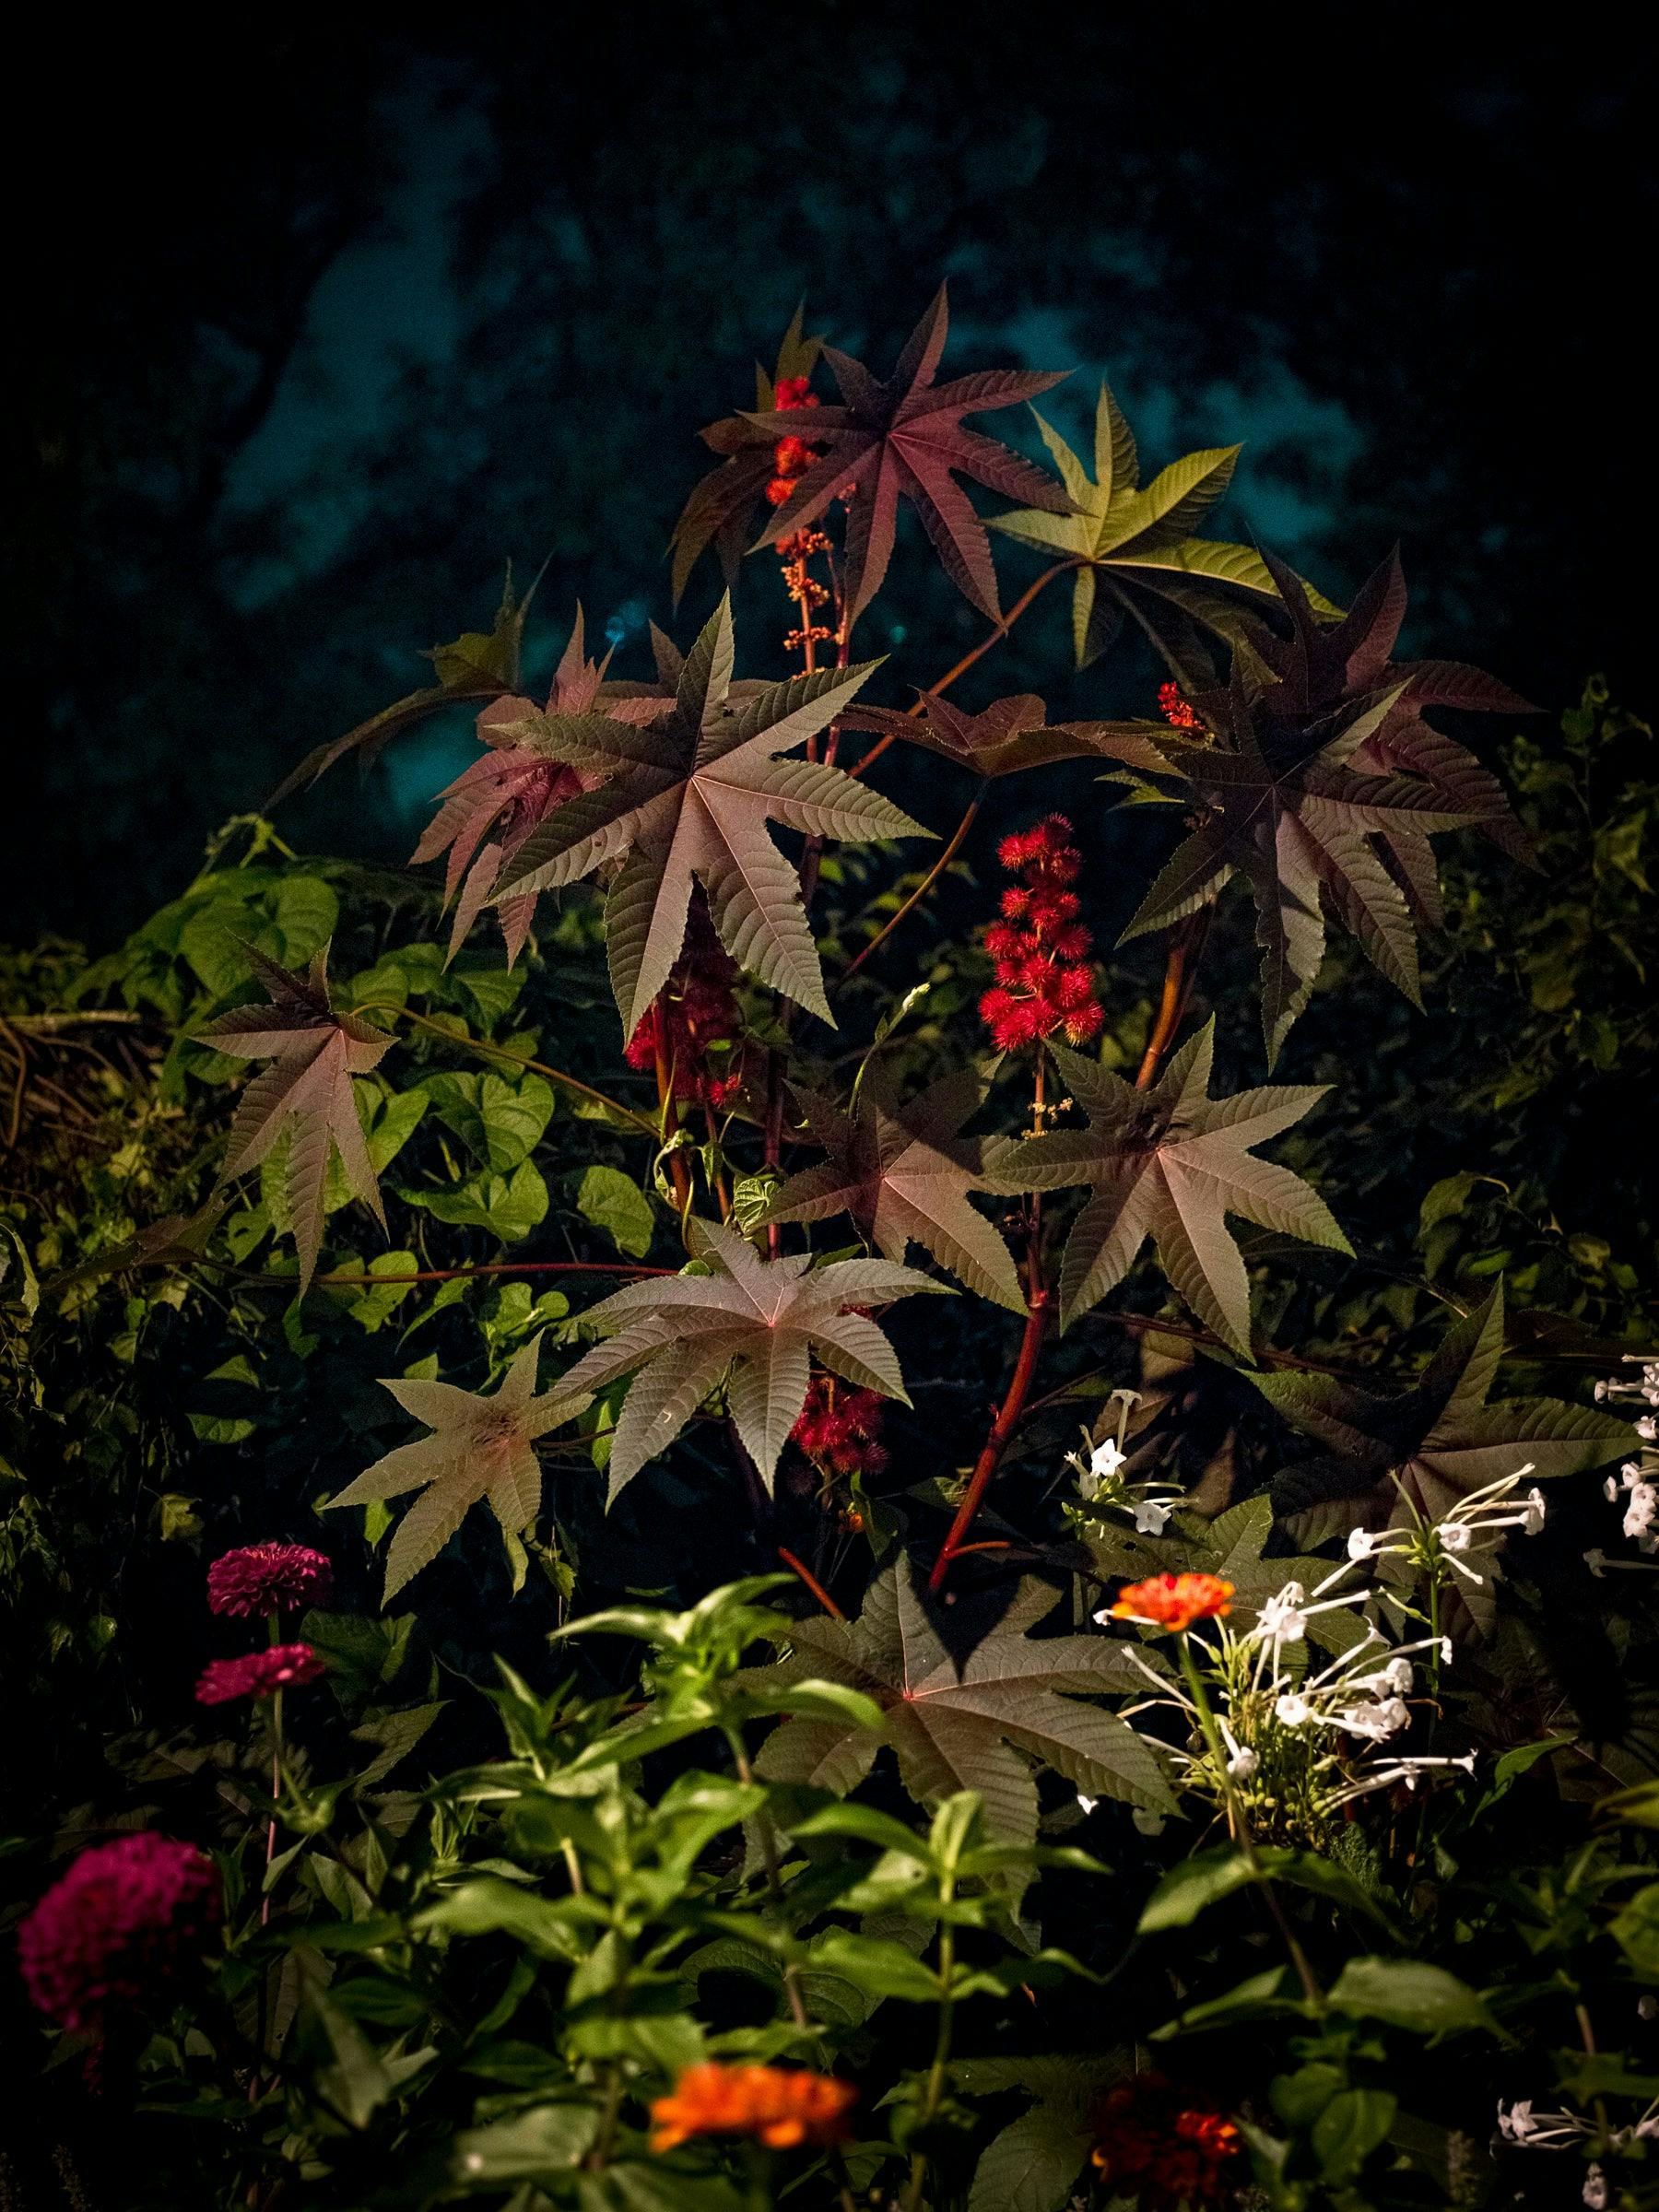 Photography by Anna Beeke titled "Midnight in the Garden #40".